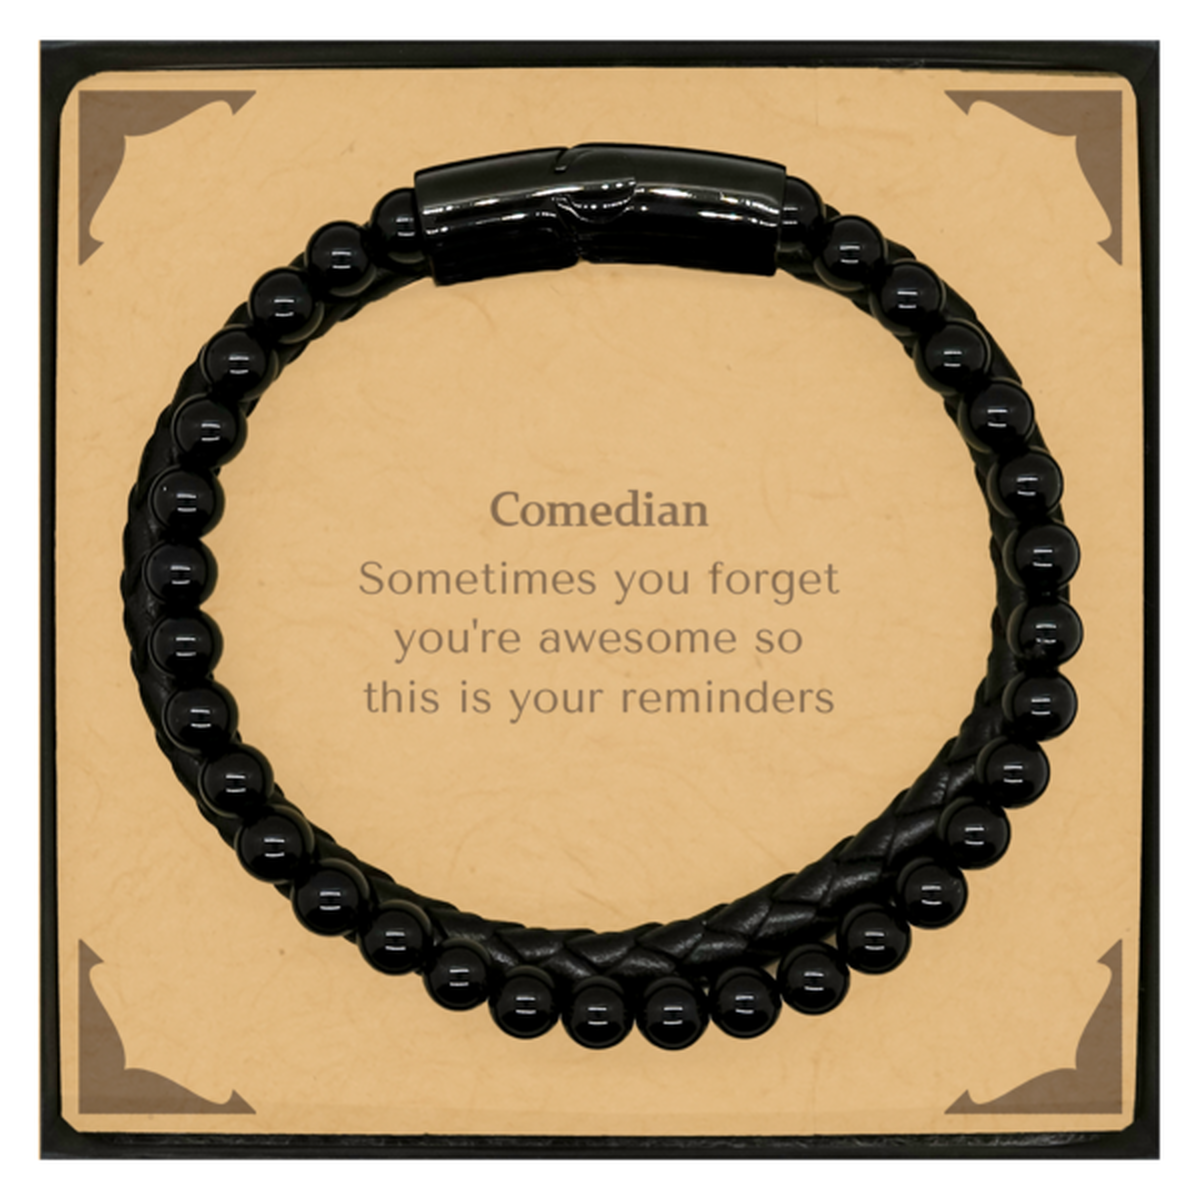 Sentimental Comedian Stone Leather Bracelets, Comedian Sometimes you forget you're awesome so this is your reminders, Graduation Christmas Birthday Gifts for Comedian, Men, Women, Coworkers